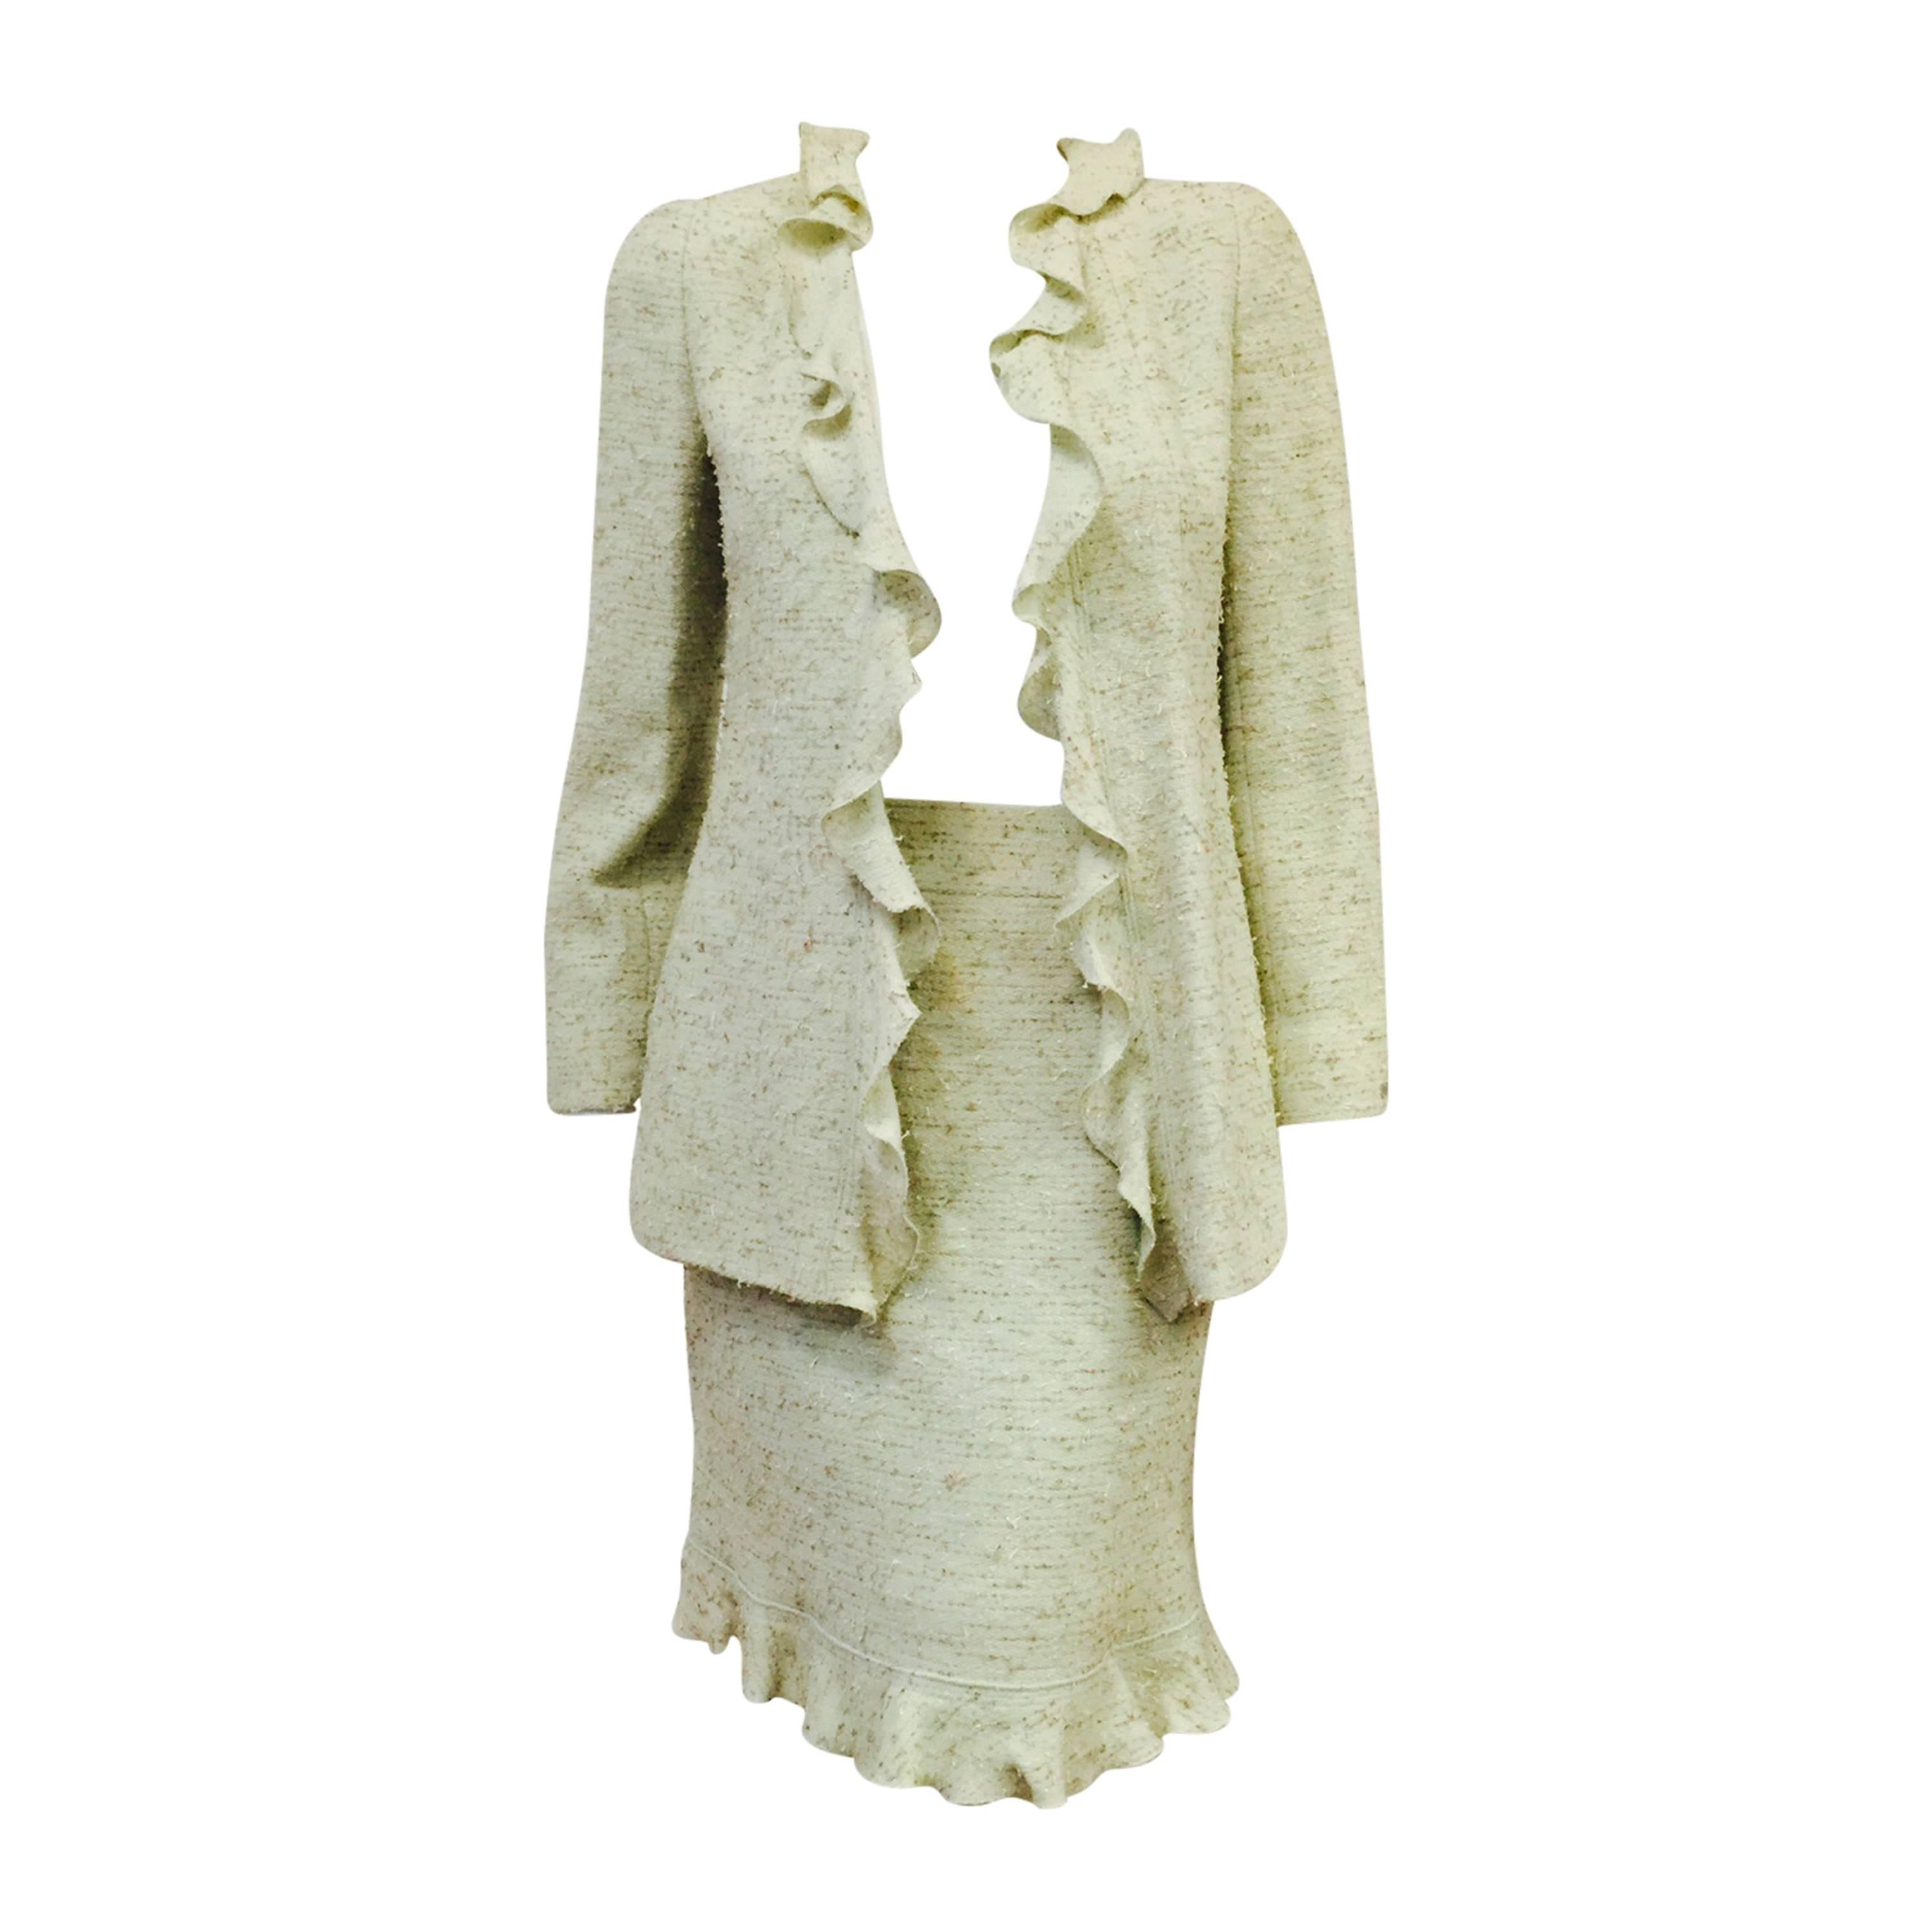 Chanel 1999 Fall Tweed Wool Blend Suit With Ruffles   For Sale